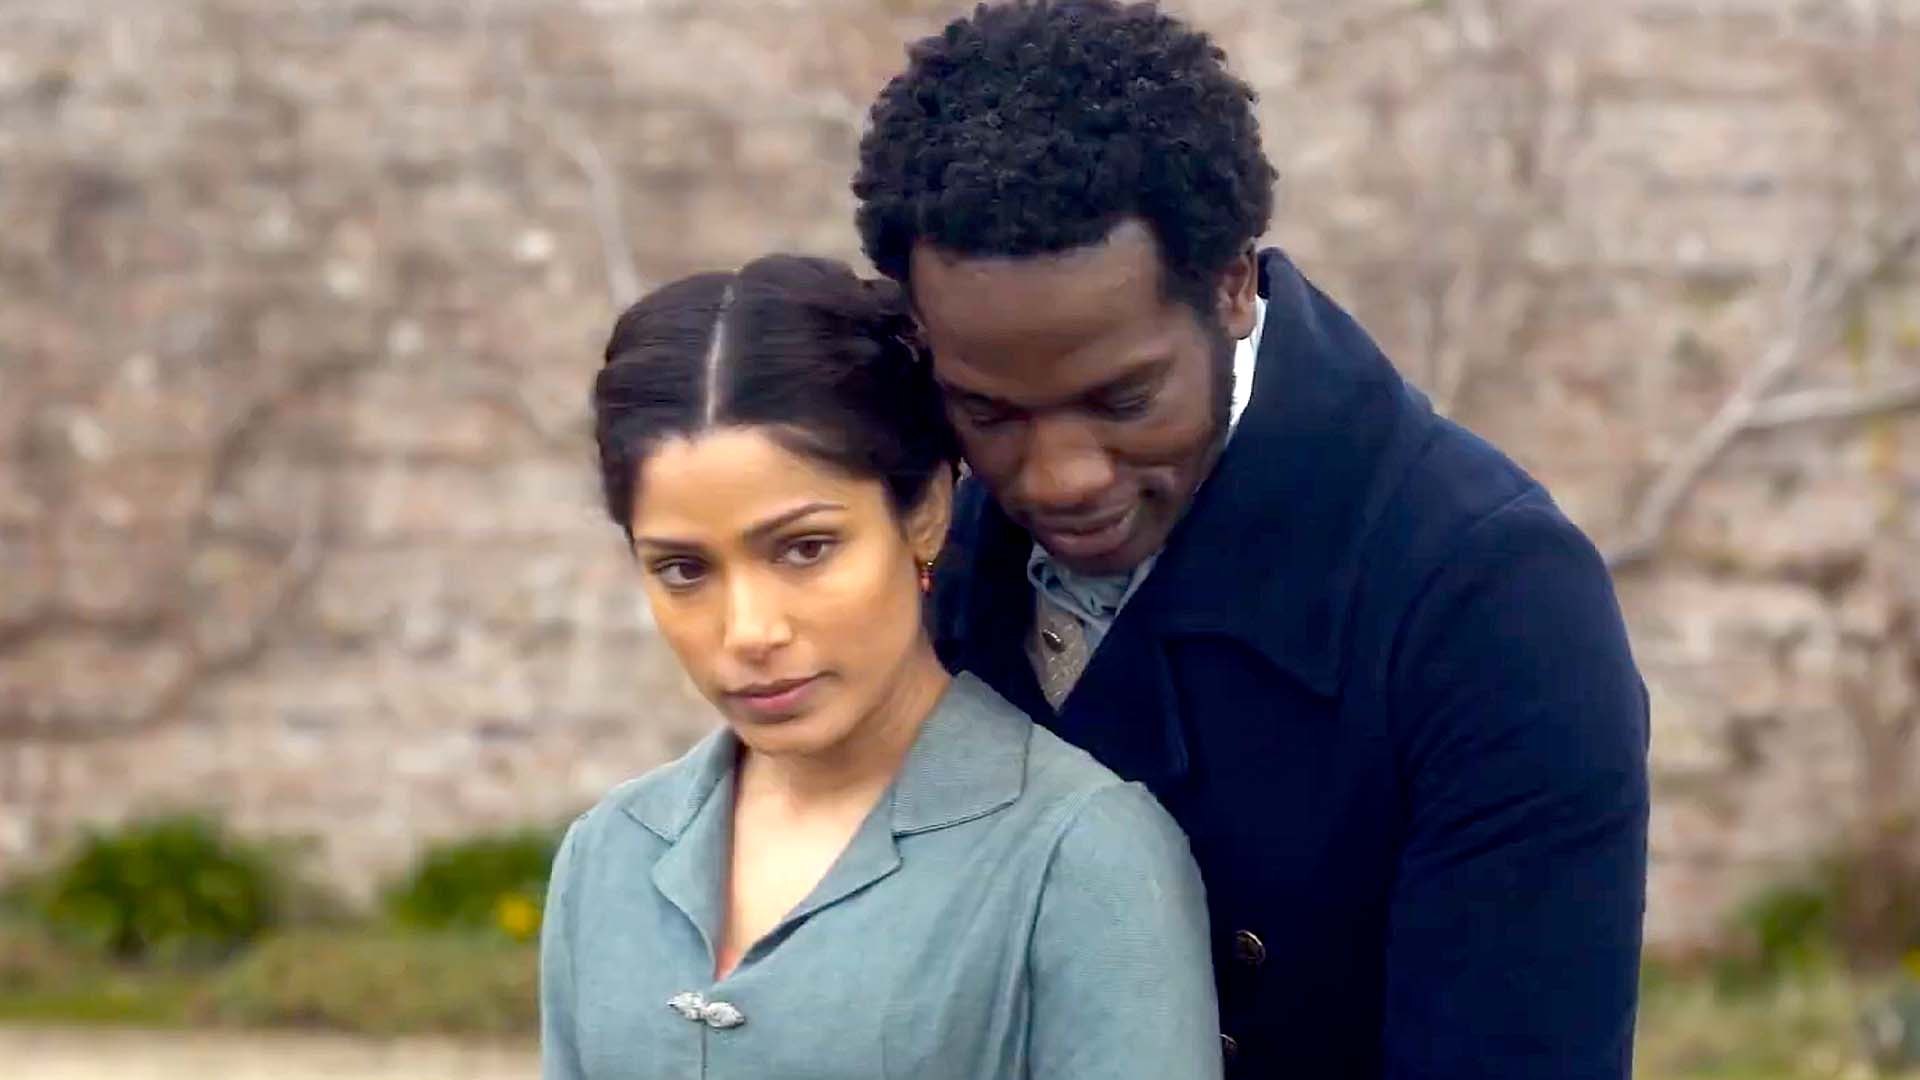 Intrusion' Ending Explained: Freida Pinto's Thriller Ends With a